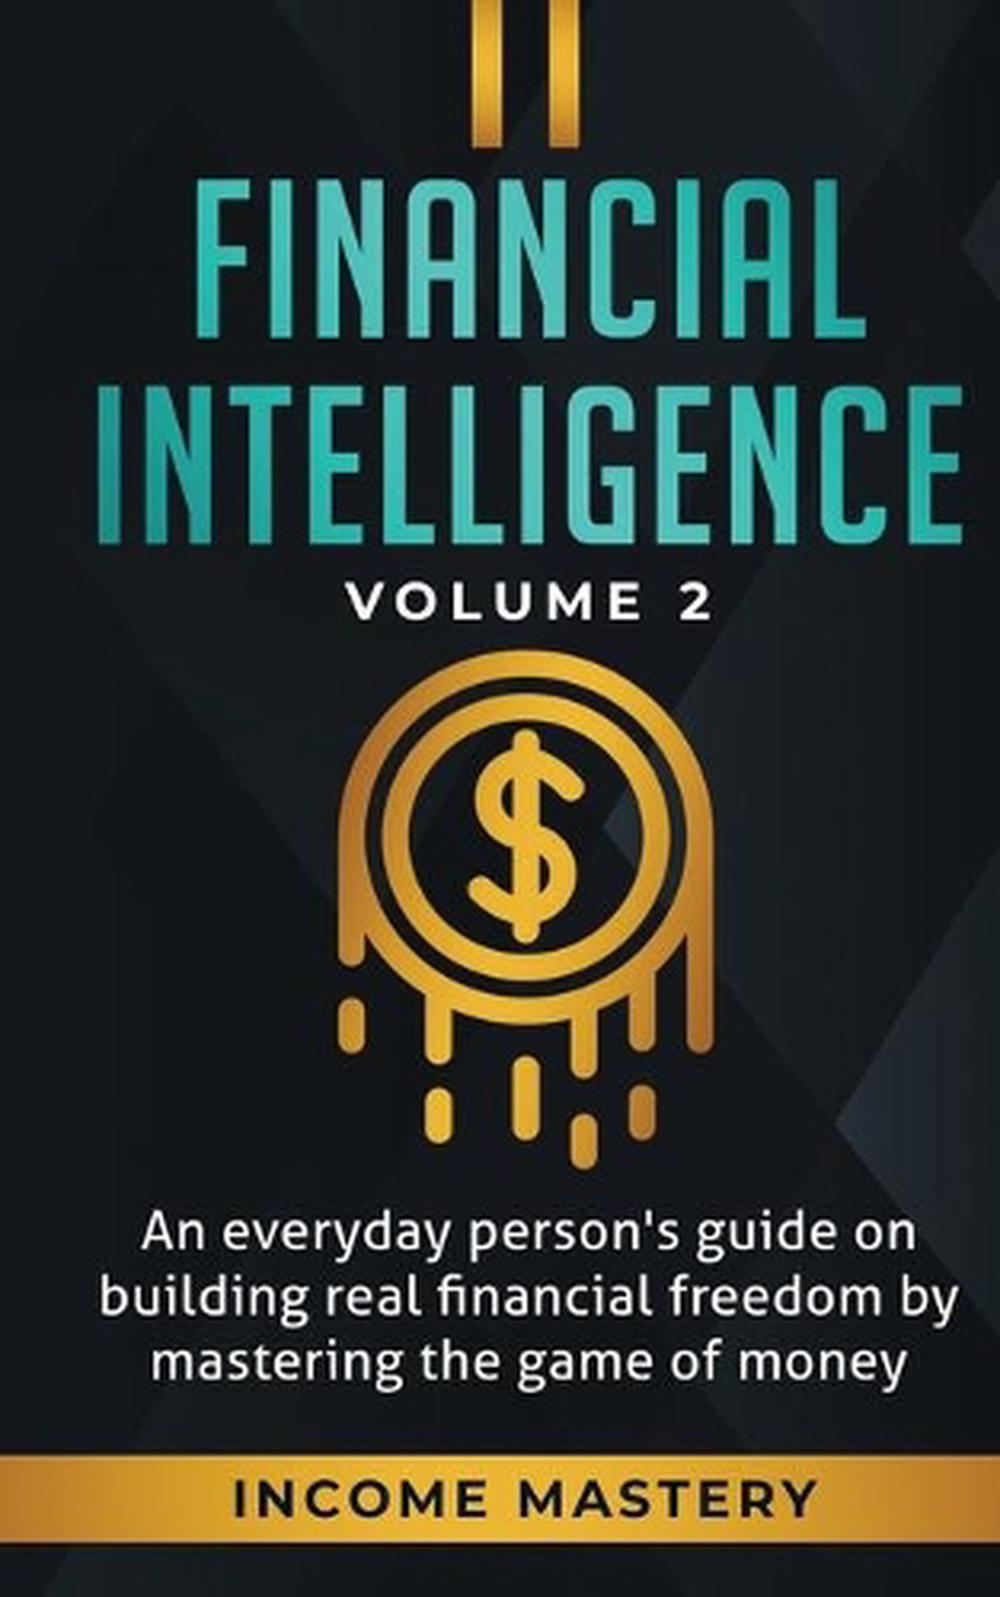 Financial Intelligence by Income Mastery (English) Paperback Book Free ...